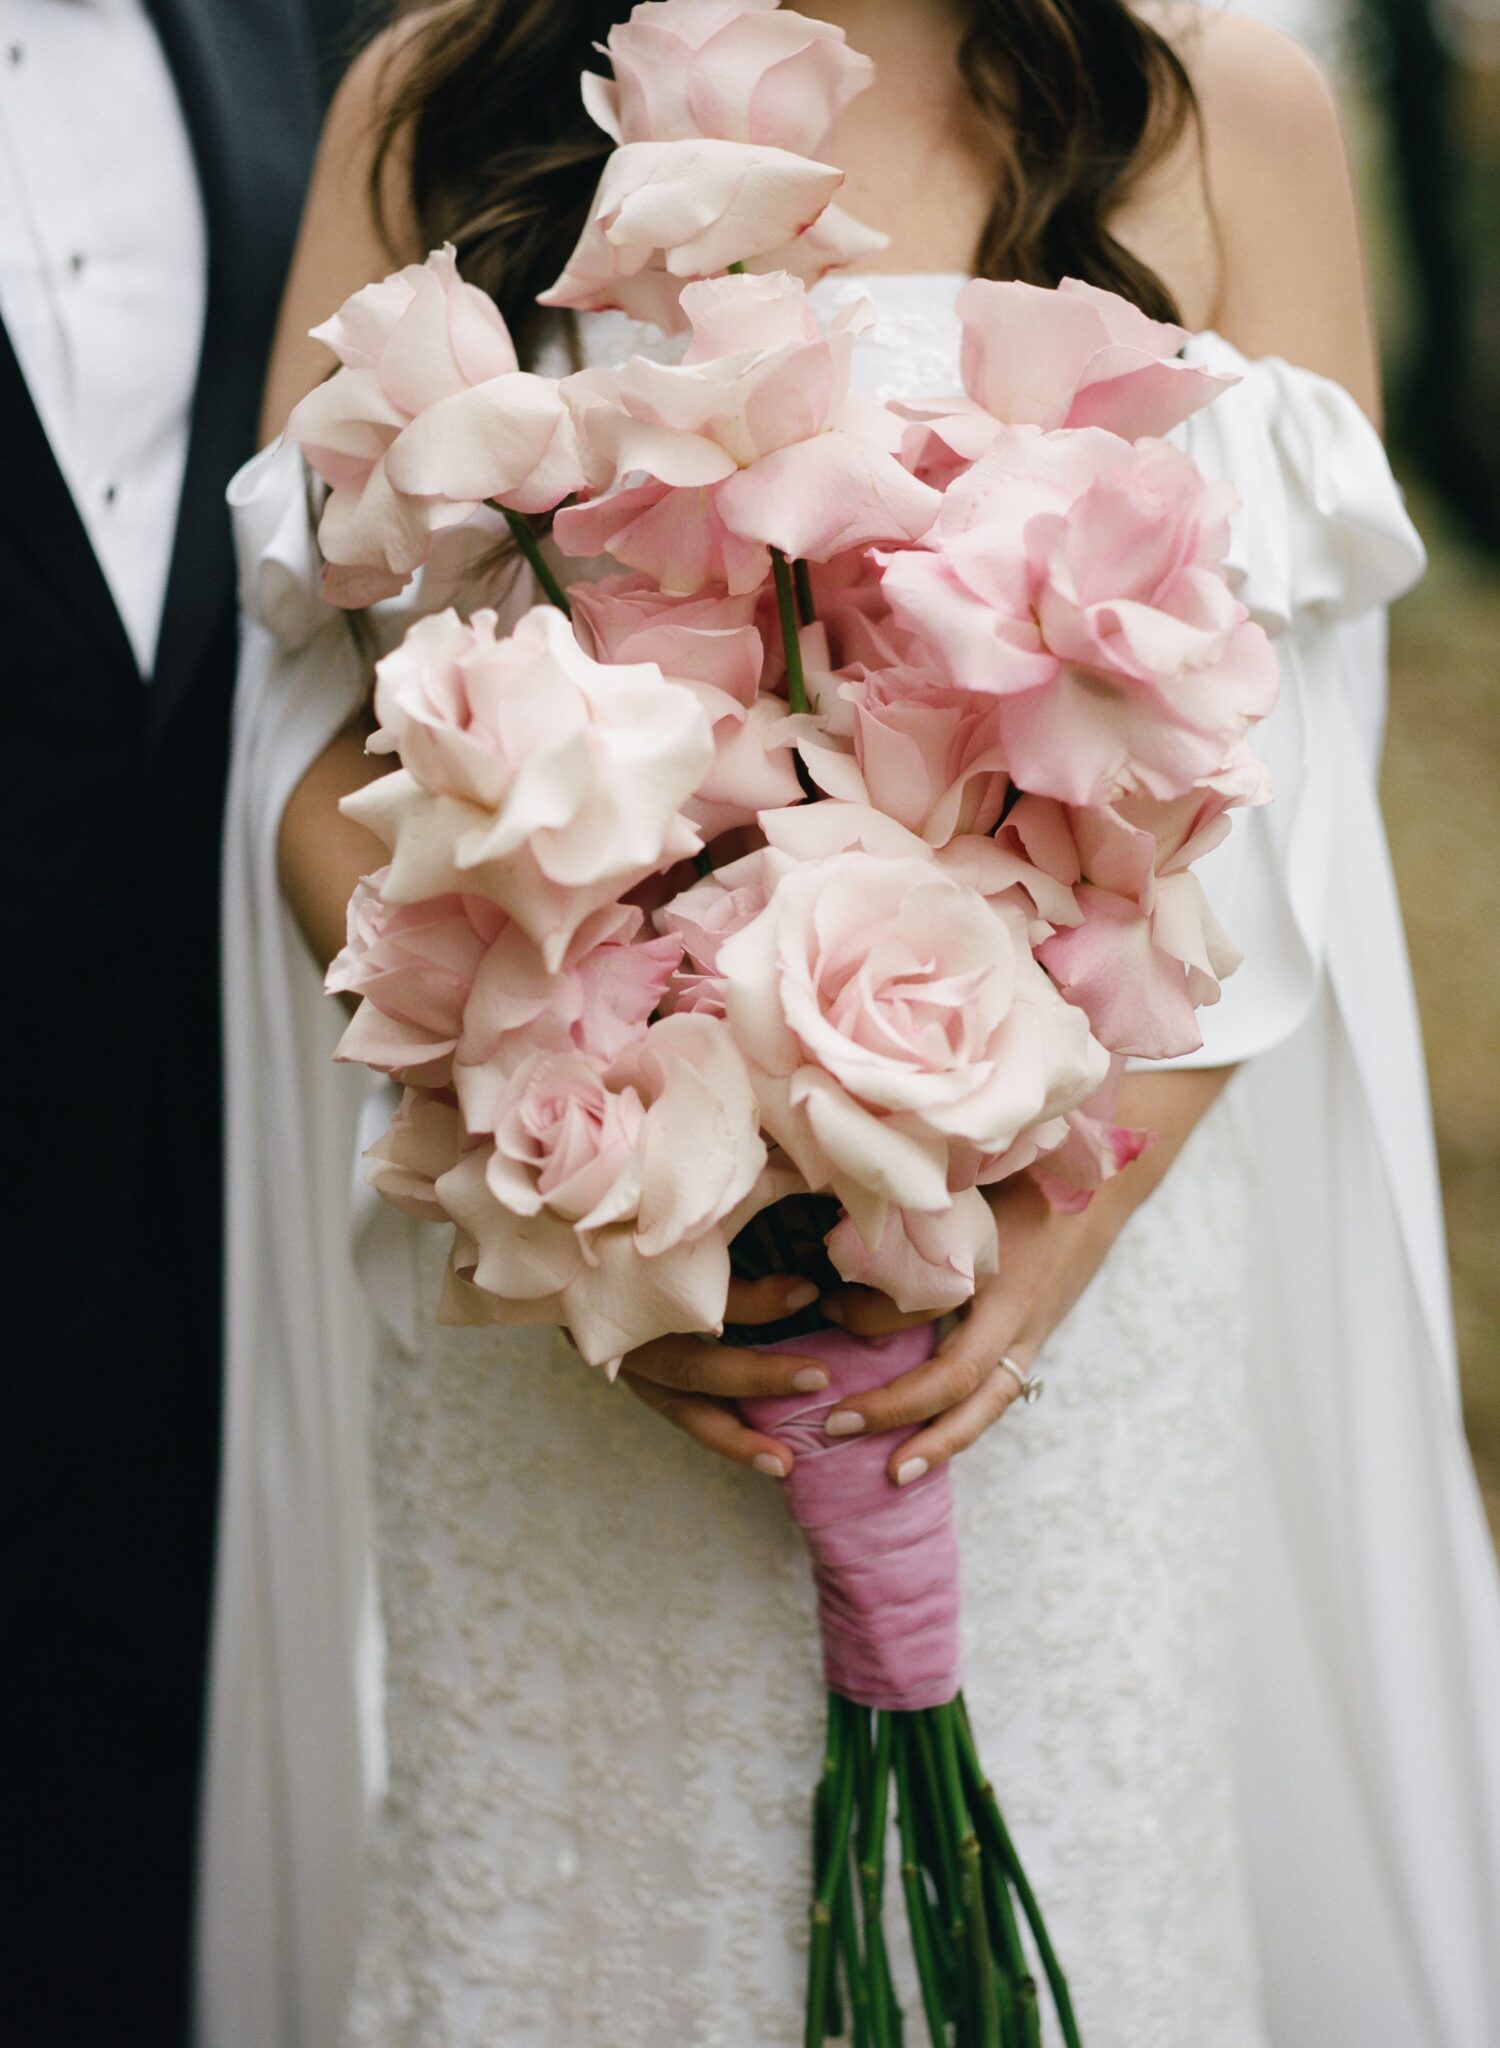 choose pink roses wedding bouquet for your wedding 1 1 1500x2048 - Choose Natural Hand Tied Wedding Bouquets for the Wedding